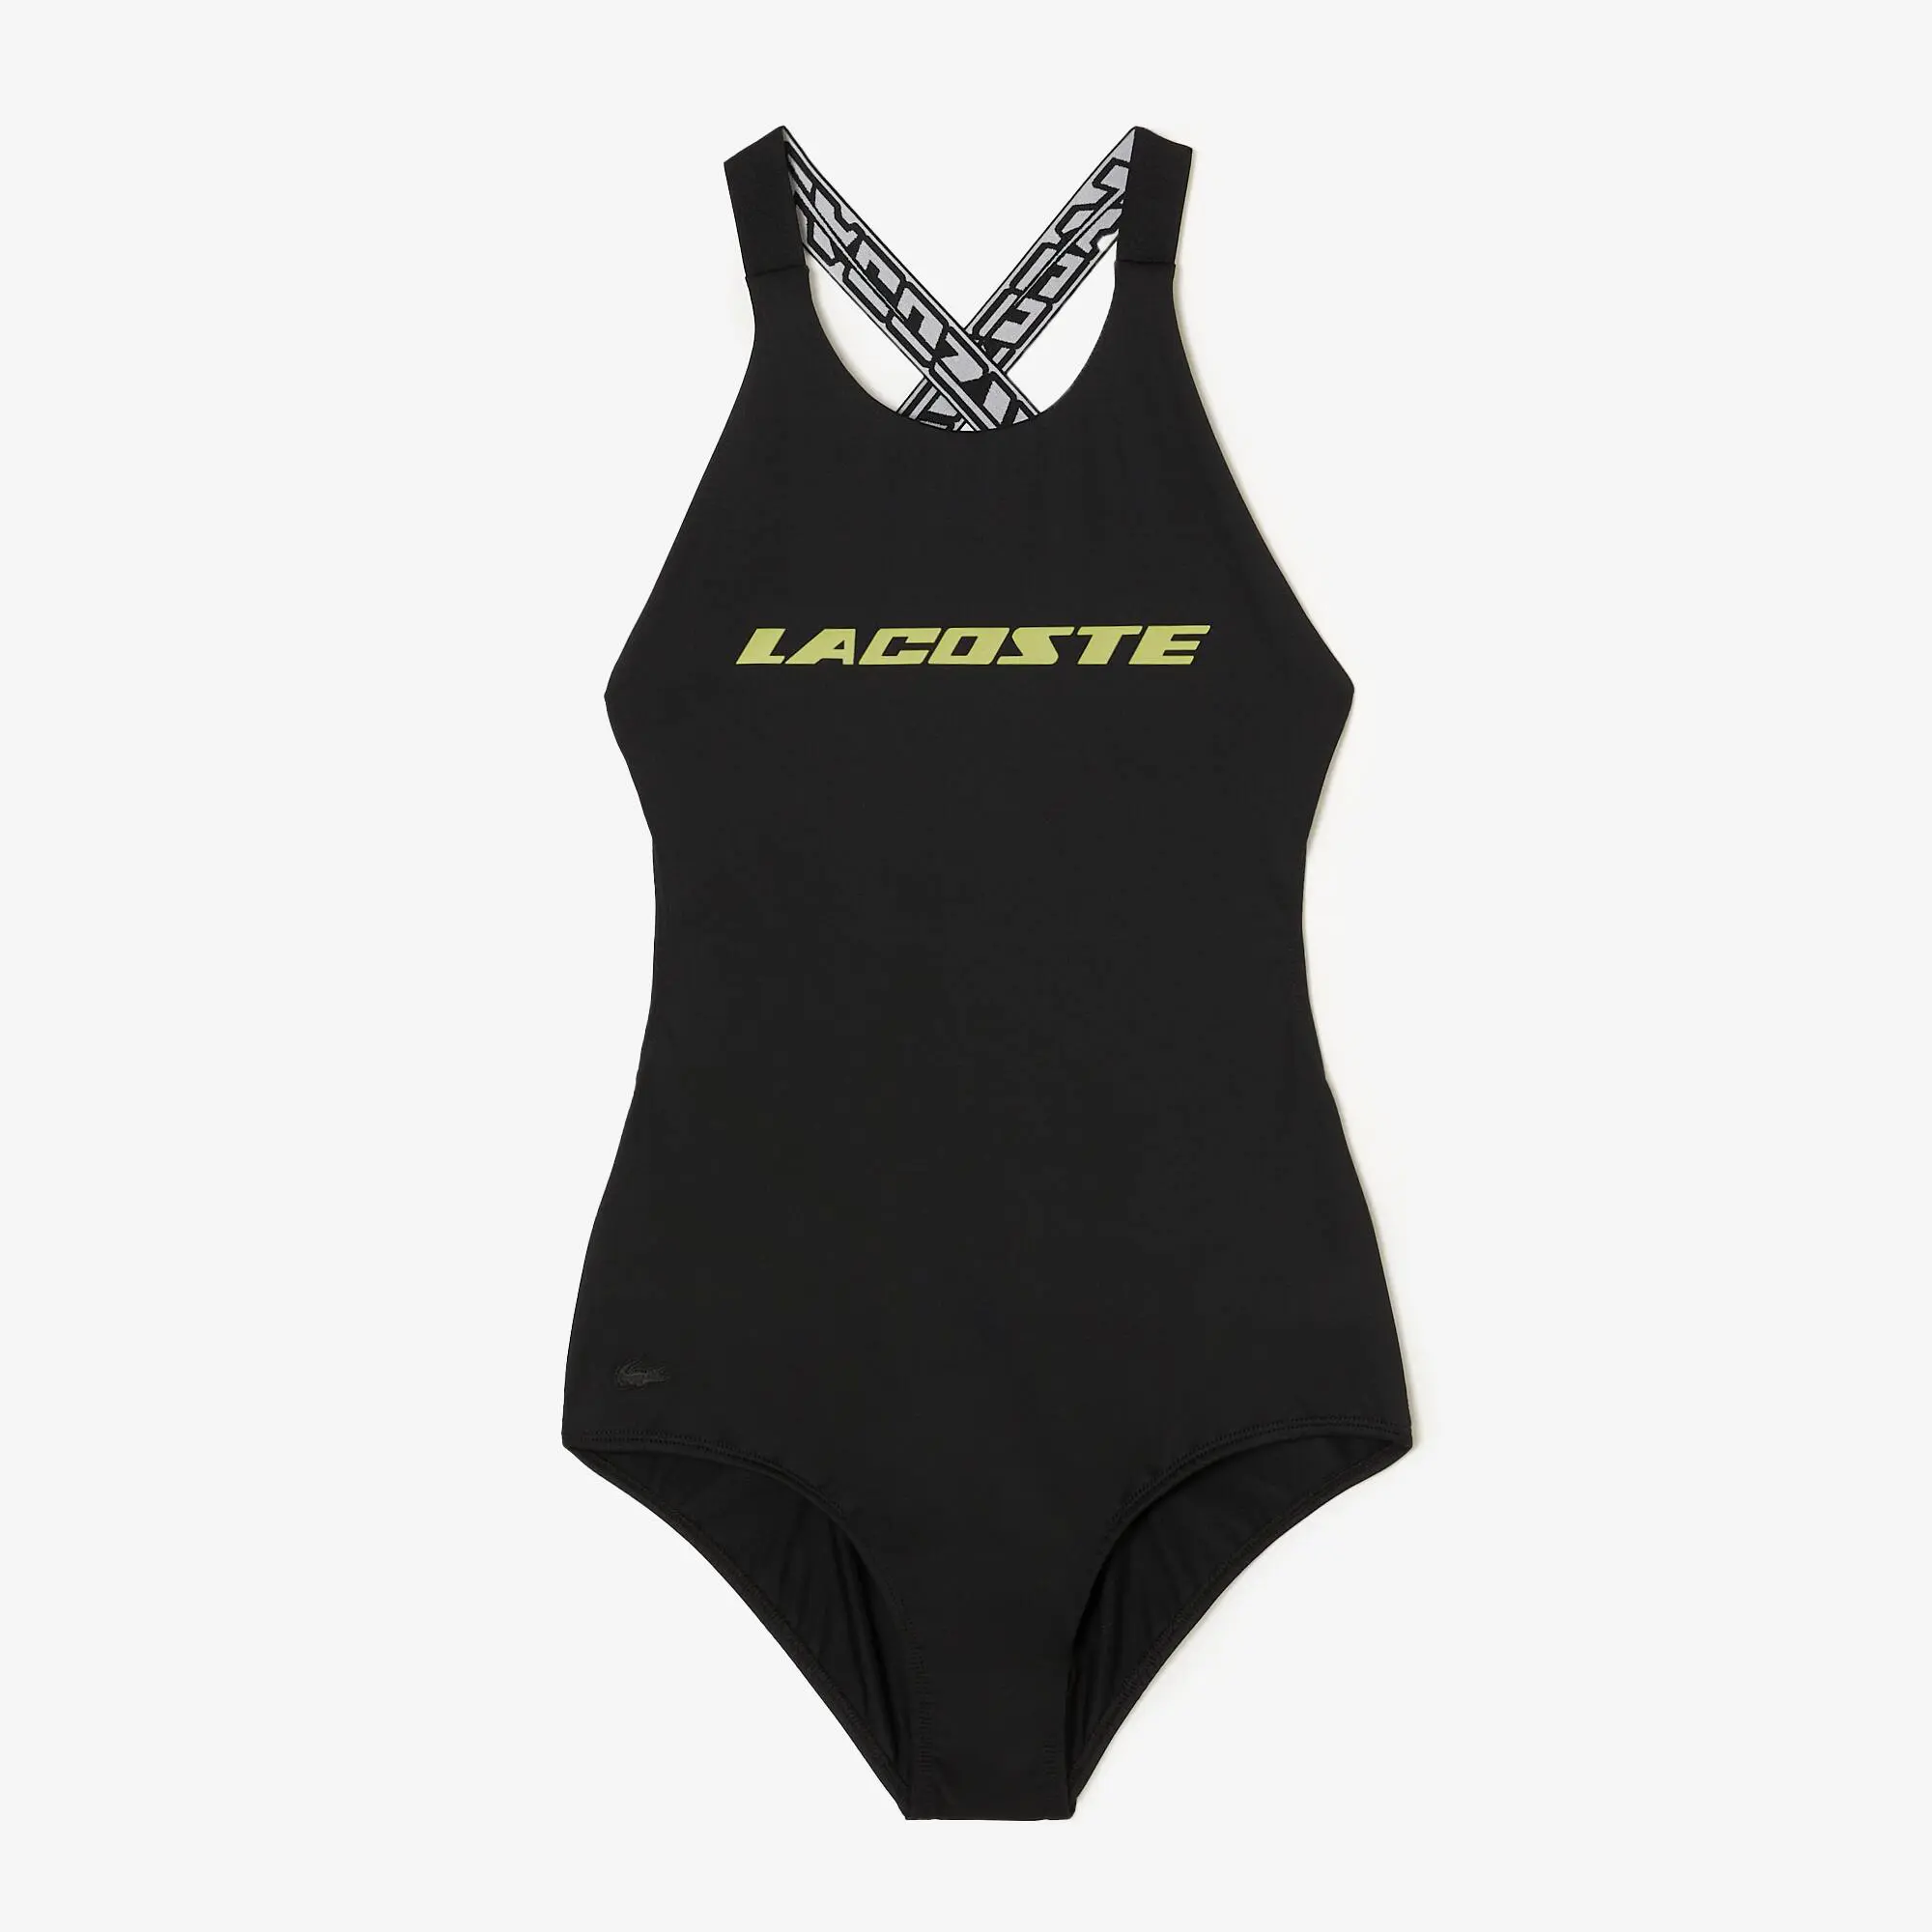 Lacoste Women’s One-Piece Recycled Polyester Swimsuit. 2